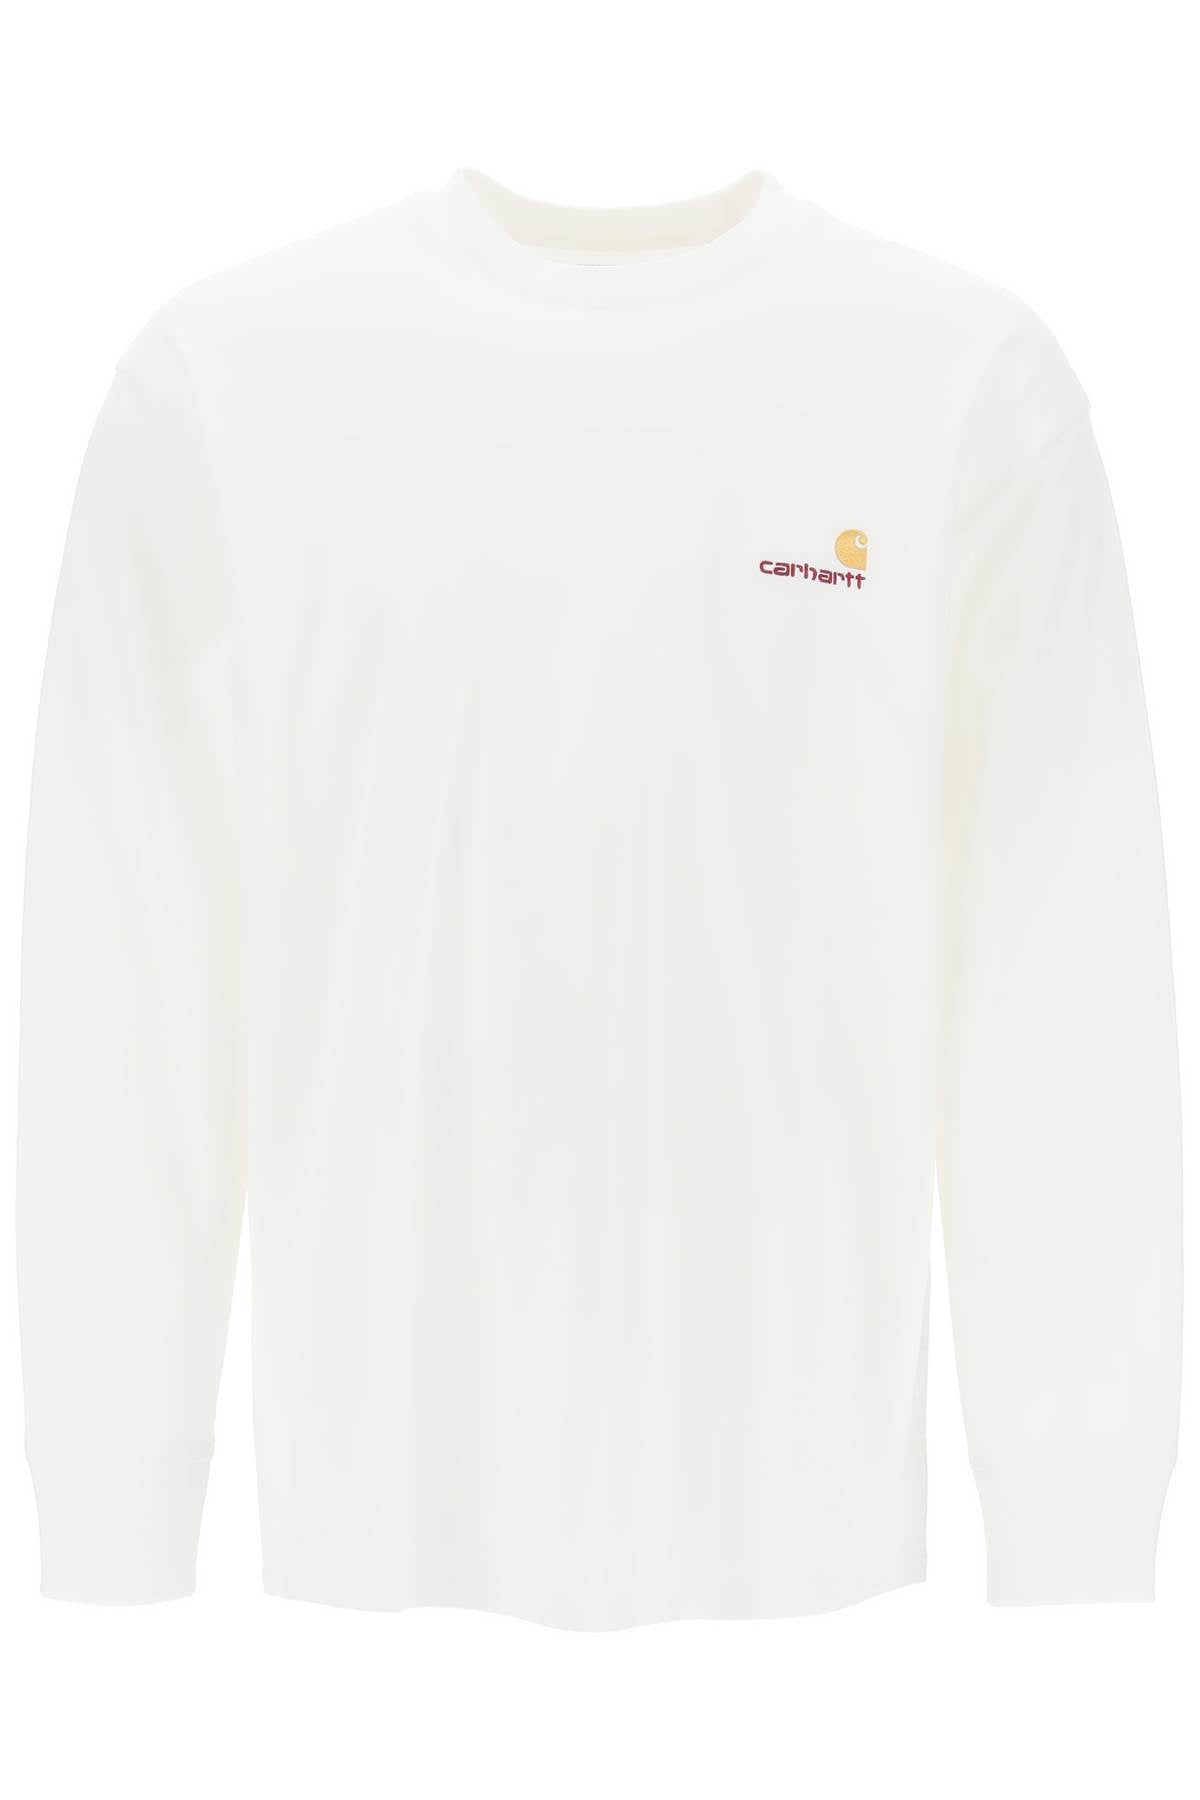 Carhartt wip "long-sleeved t-shirt with-0